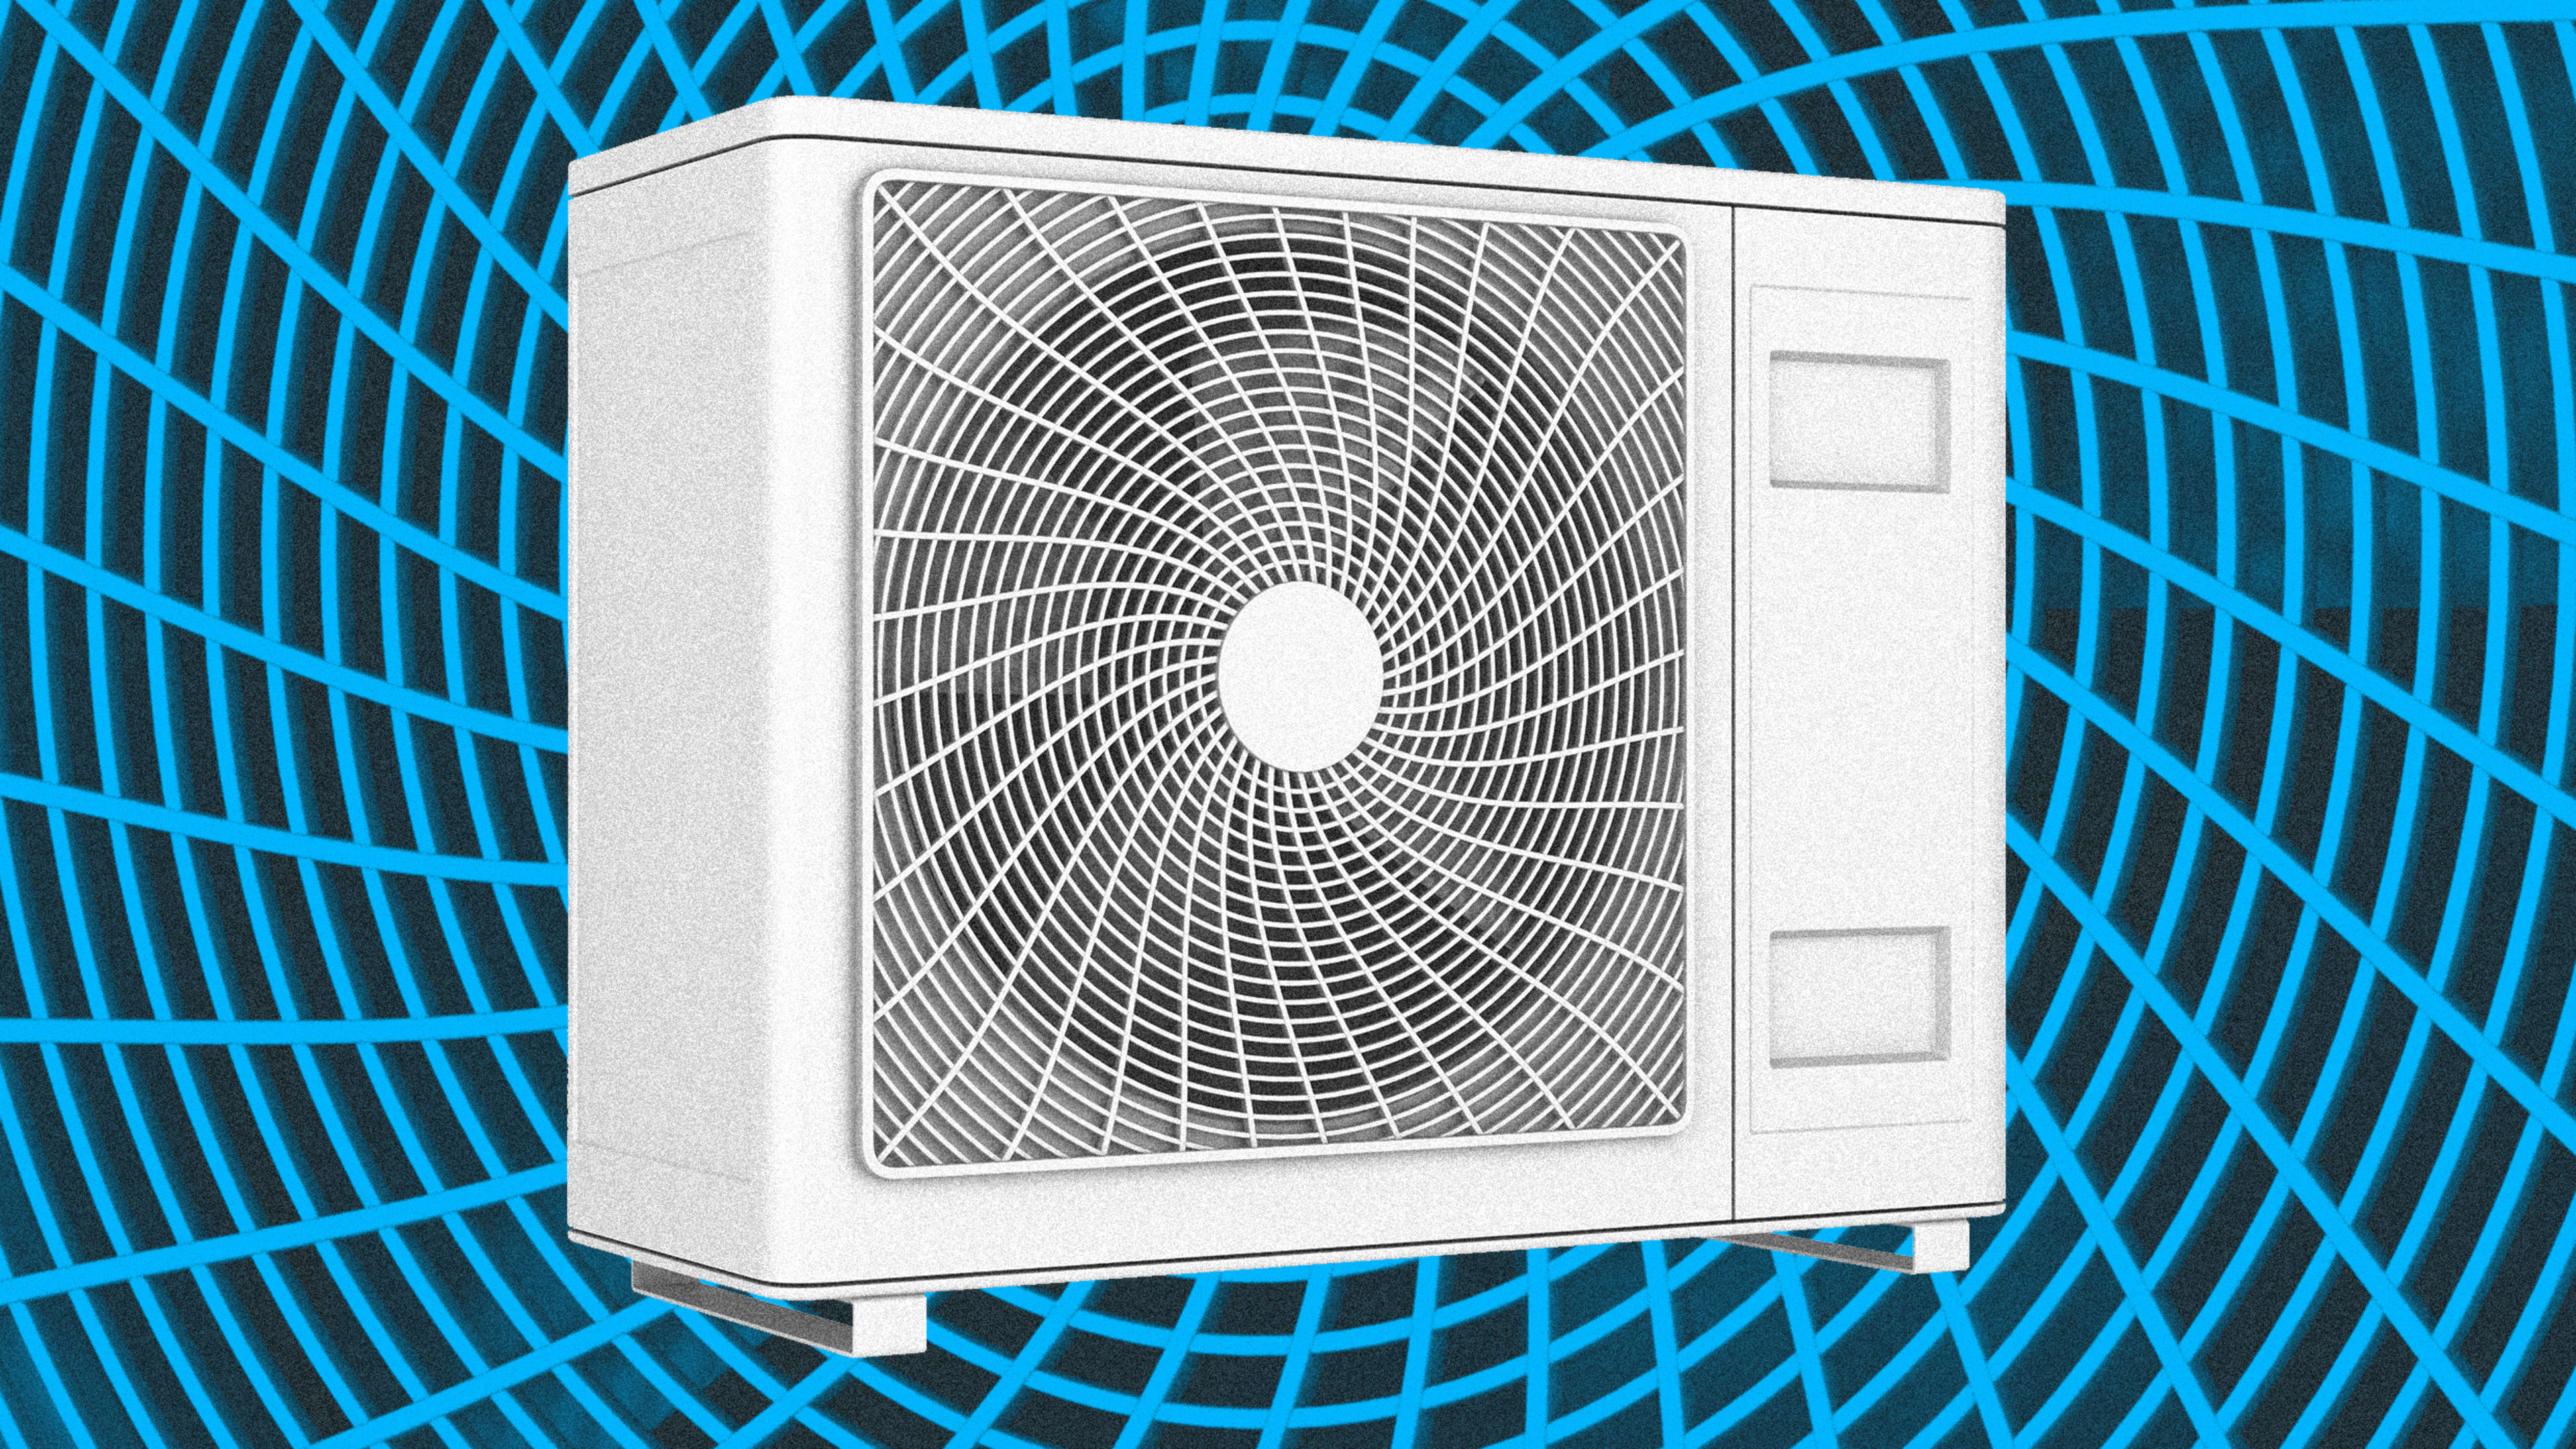 There’s huge potential energy savings hiding in our air conditioners